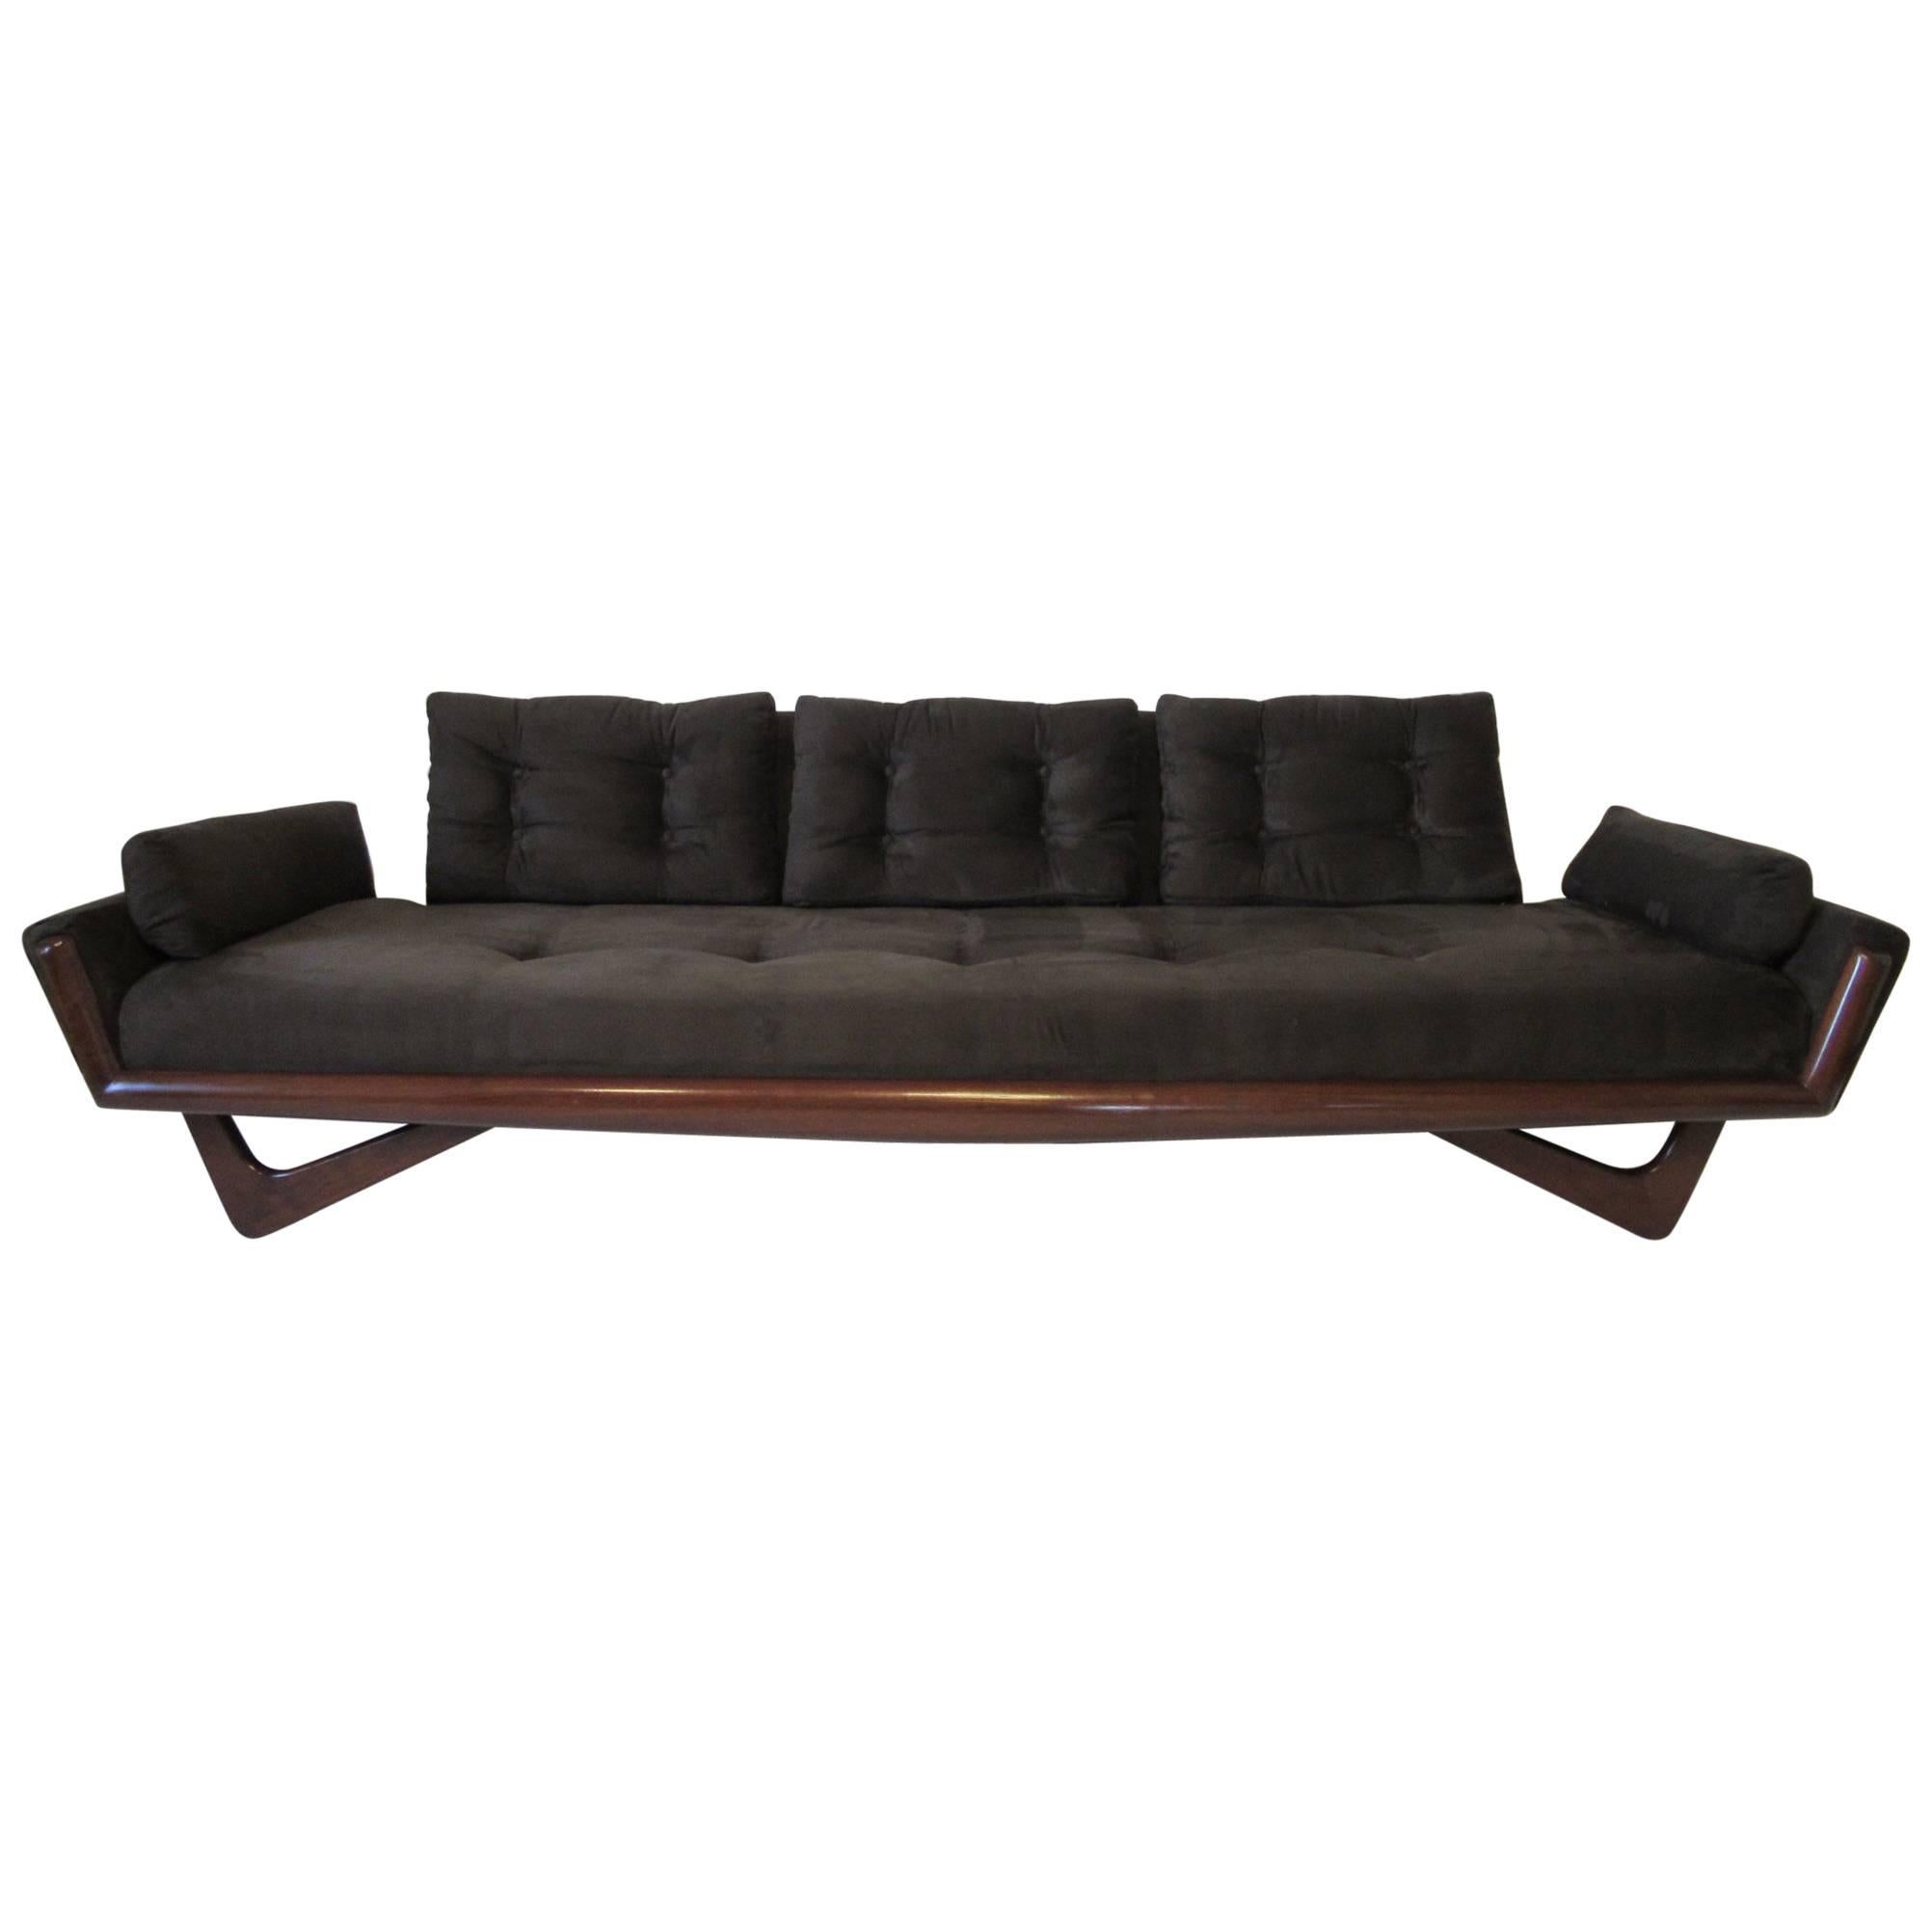 Adrian Pearsall and Craft Associates Sofa Model # 2404-S